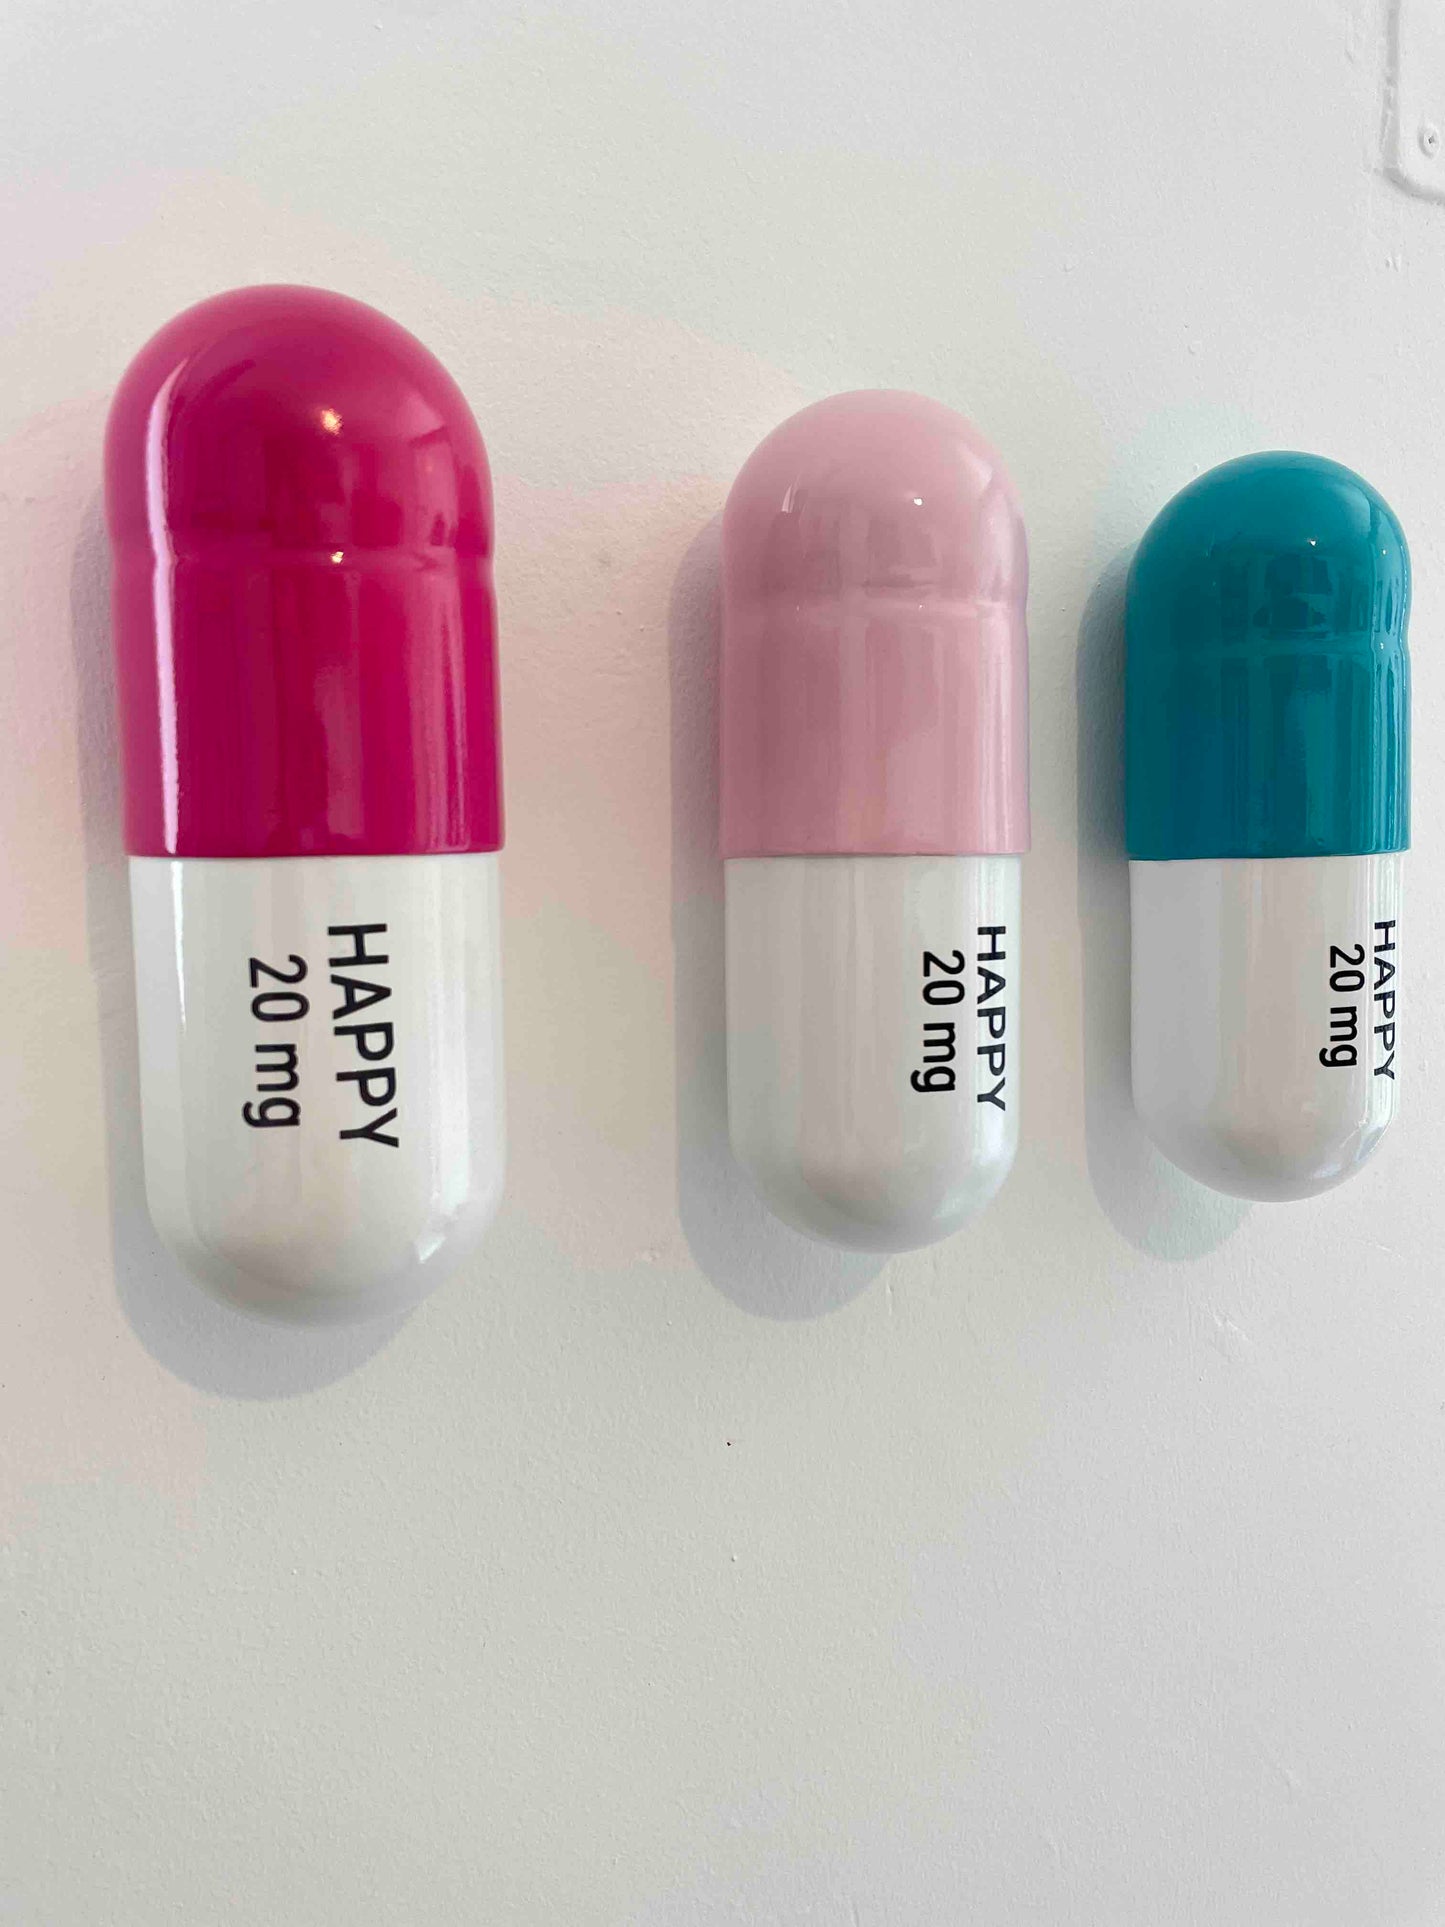 20 MG Happy pill Combo (turquoise, light pink and pink) - figurative sculpture